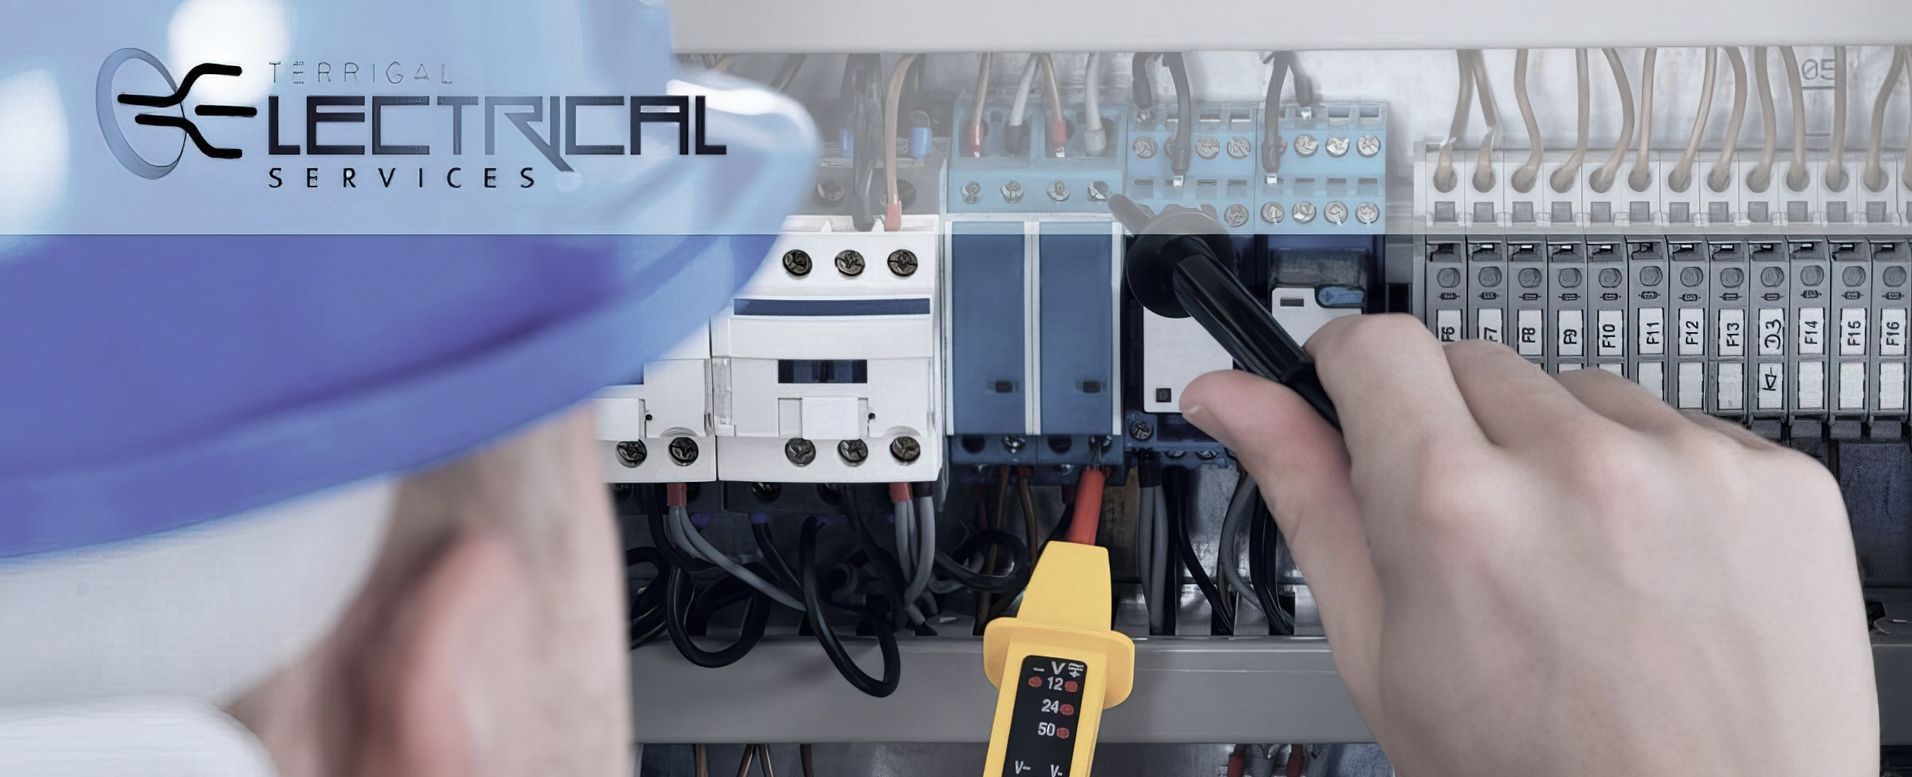 Terrigal Electrical Services Banner image